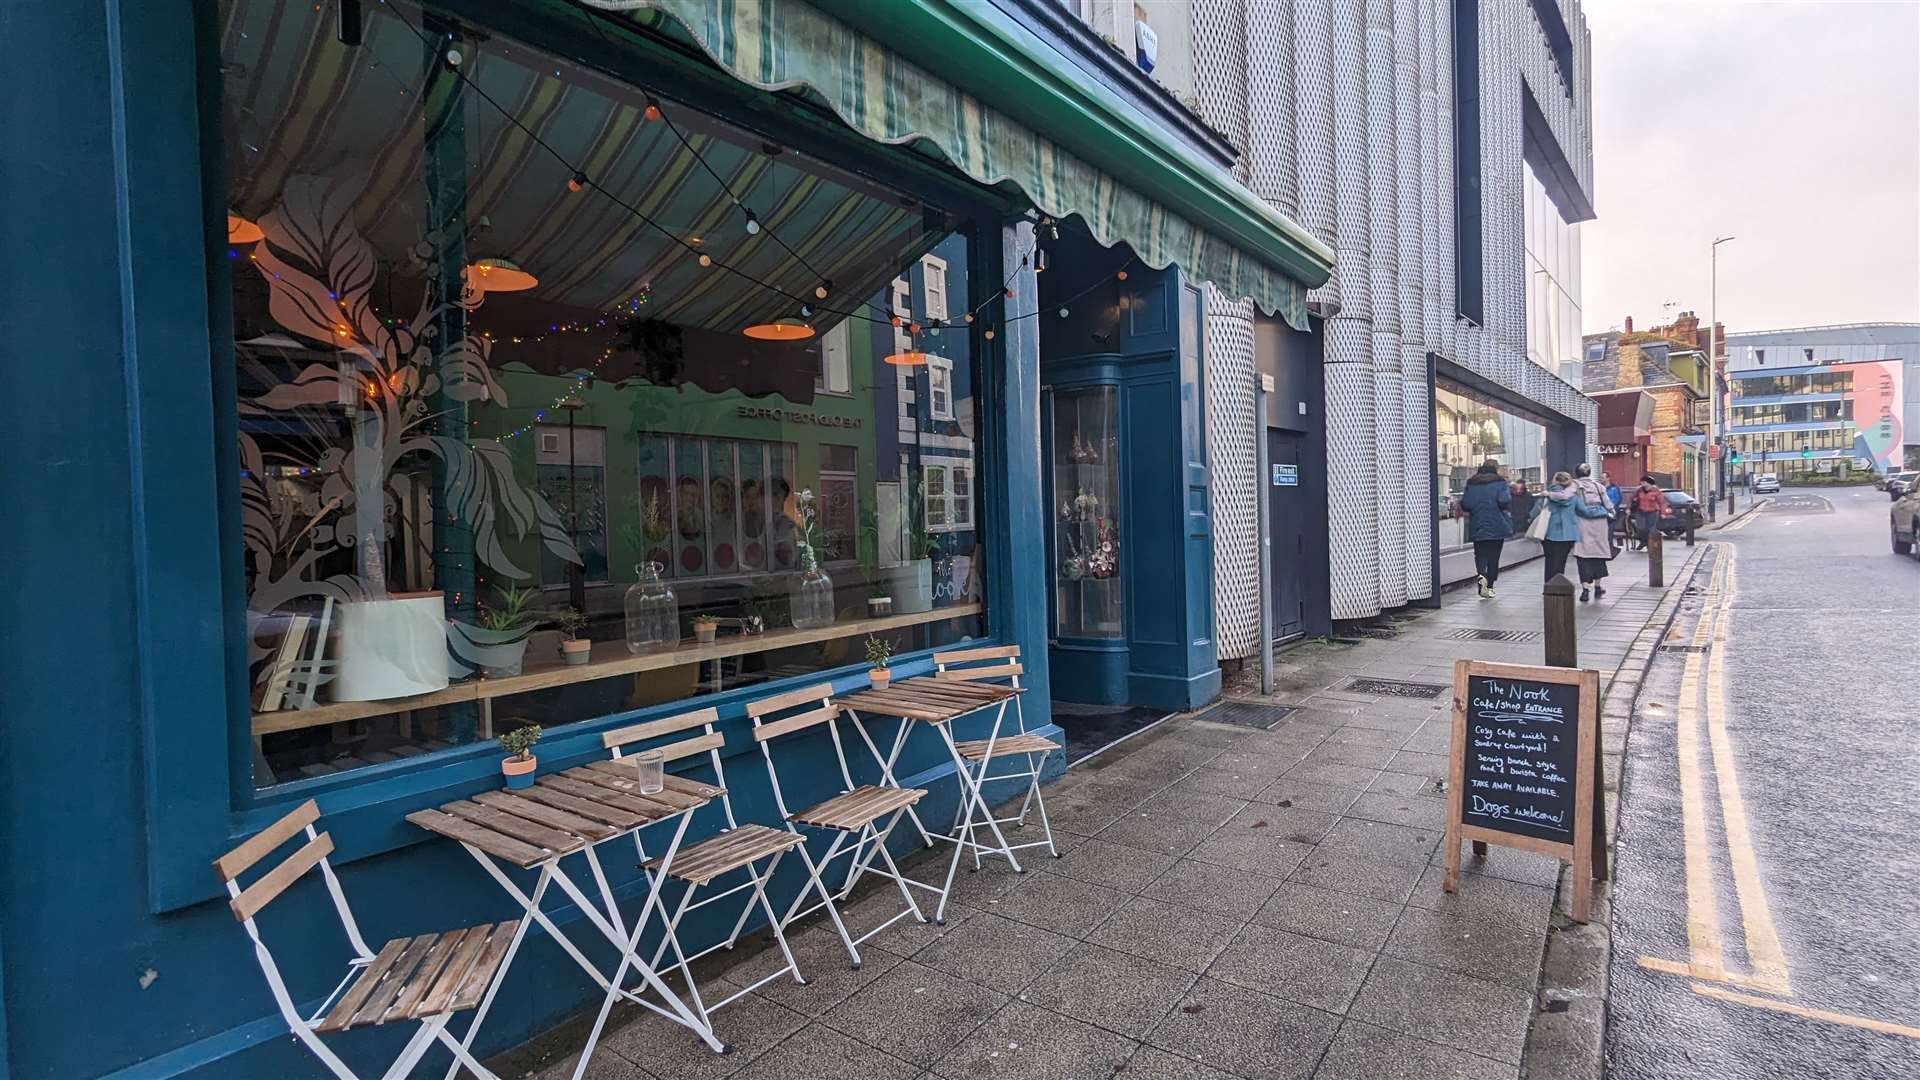 The Nook café in Tontine Street, Folkestone, had become a town favourite but has been forced to close because of the cost-of-living crisis.